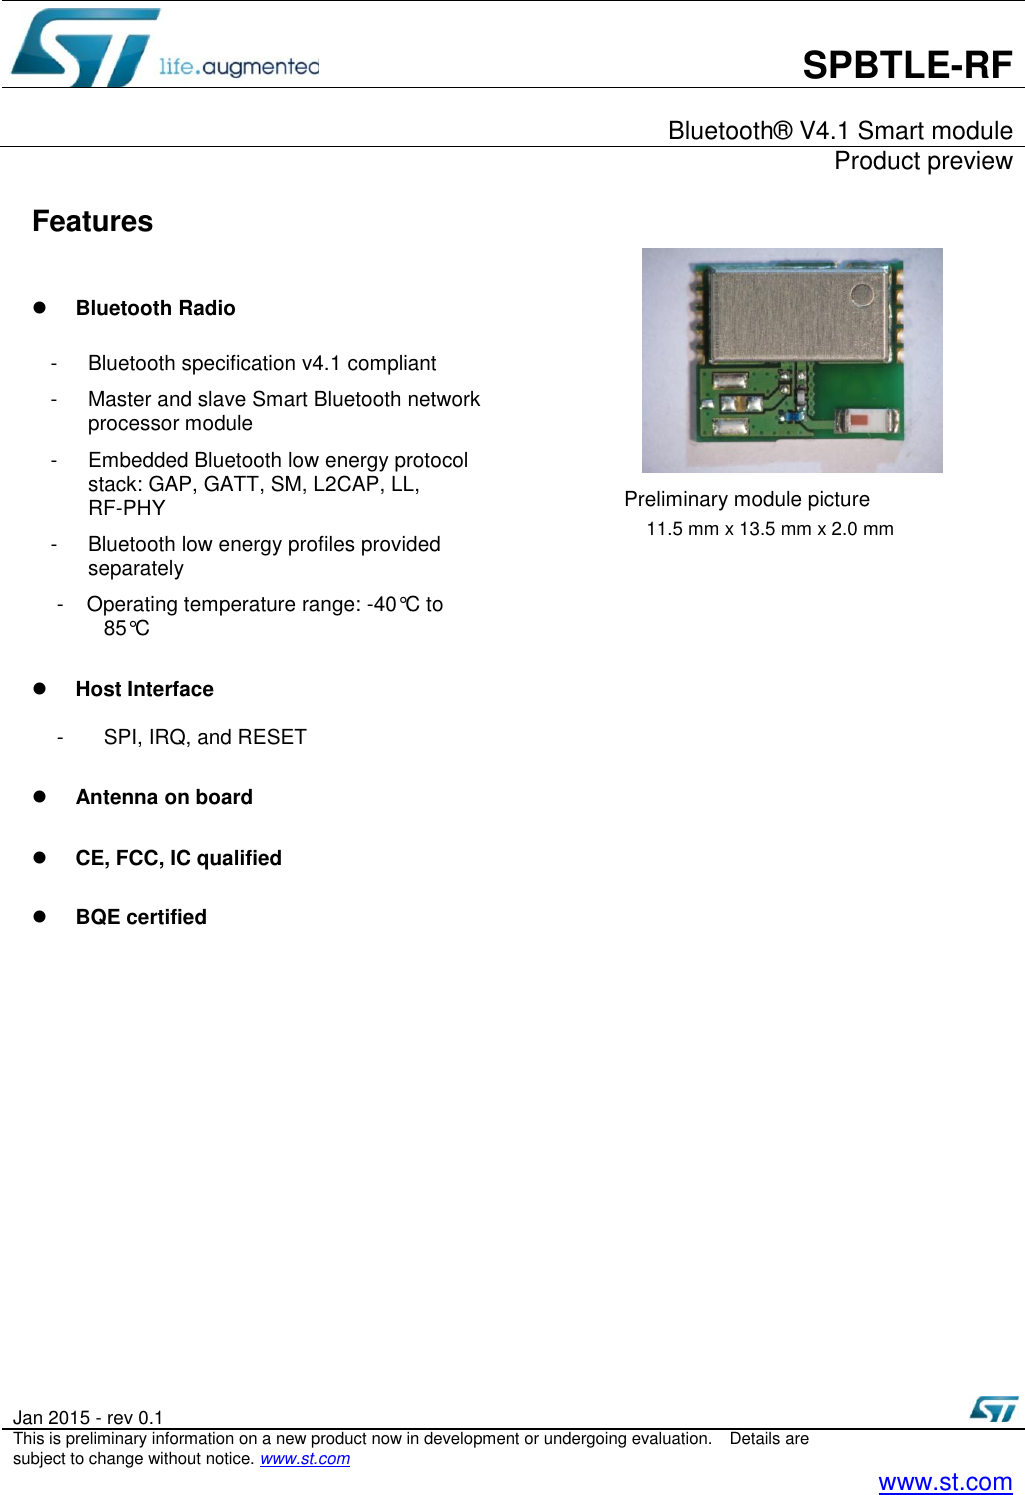       SPBTLE-RF    Bluetooth® V4.1 Smart module     Product preview  Jan 2015 - rev 0.1   This is preliminary information on a new product now in development or undergoing evaluation.  Details are subject to change without notice. www.st.com    www.st.com  Features   Bluetooth Radio  -  Bluetooth specification v4.1 compliant   -  Master and slave Smart Bluetooth network processor module -  Embedded Bluetooth low energy protocol stack: GAP, GATT, SM, L2CAP, LL, RF-PHY -  Bluetooth low energy profiles provided separately -  Operating temperature range: -40°C to 85°C   Host Interface  -  SPI, IRQ, and RESET   Antenna on board   CE, FCC, IC qualified   BQE certified                        Preliminary module picture 11.5 mm x 13.5 mm x 2.0 mm